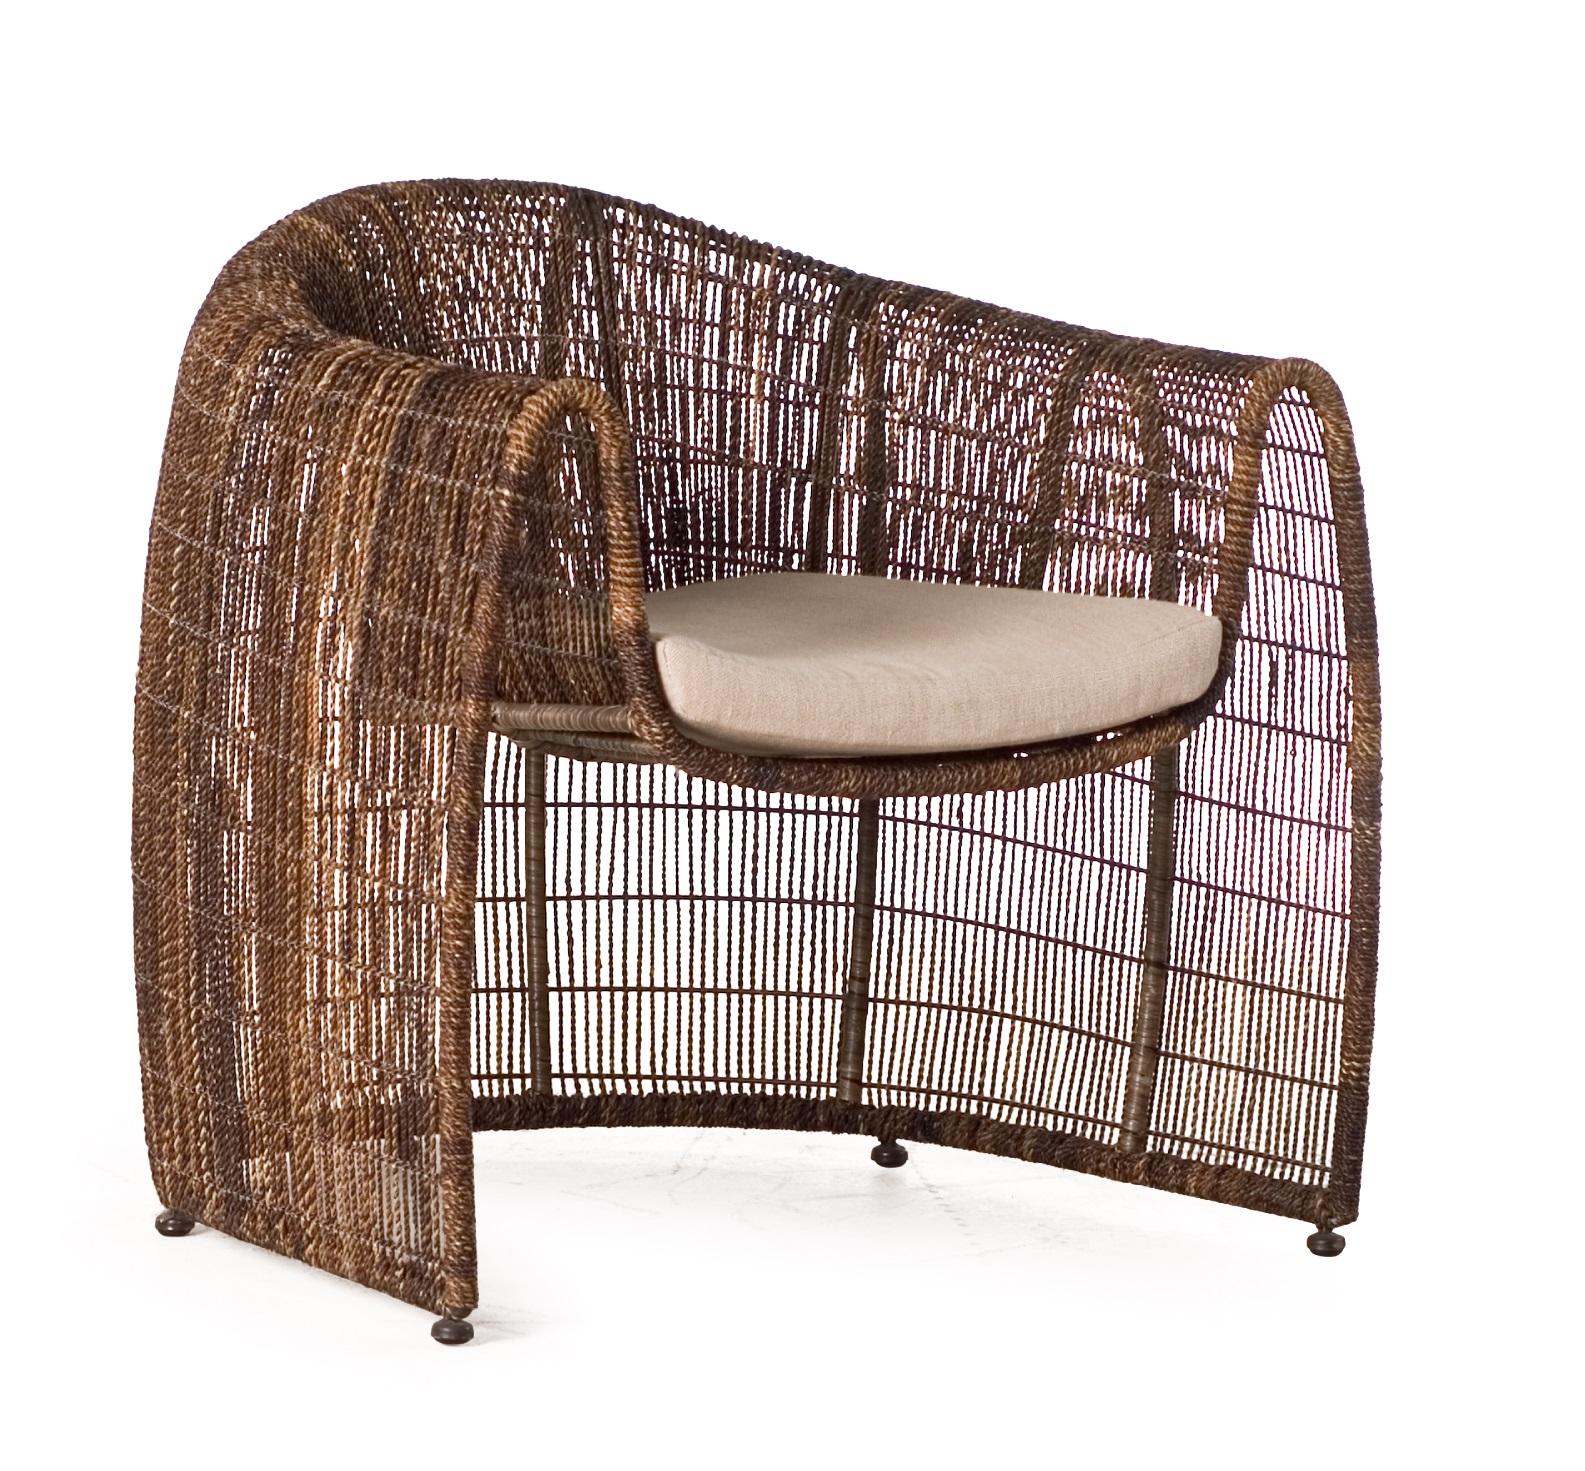 Indoor lulu club chair by Kenneth Cobonpue.
Materials: abaca, nylon, steel. 
Also available in other colors and for outdoors. 
Dimensions: 78 cm x 84 cm x H 80.5 cm.

Lulu adds grace to any space with its clean, nest-like silhouette. Its open